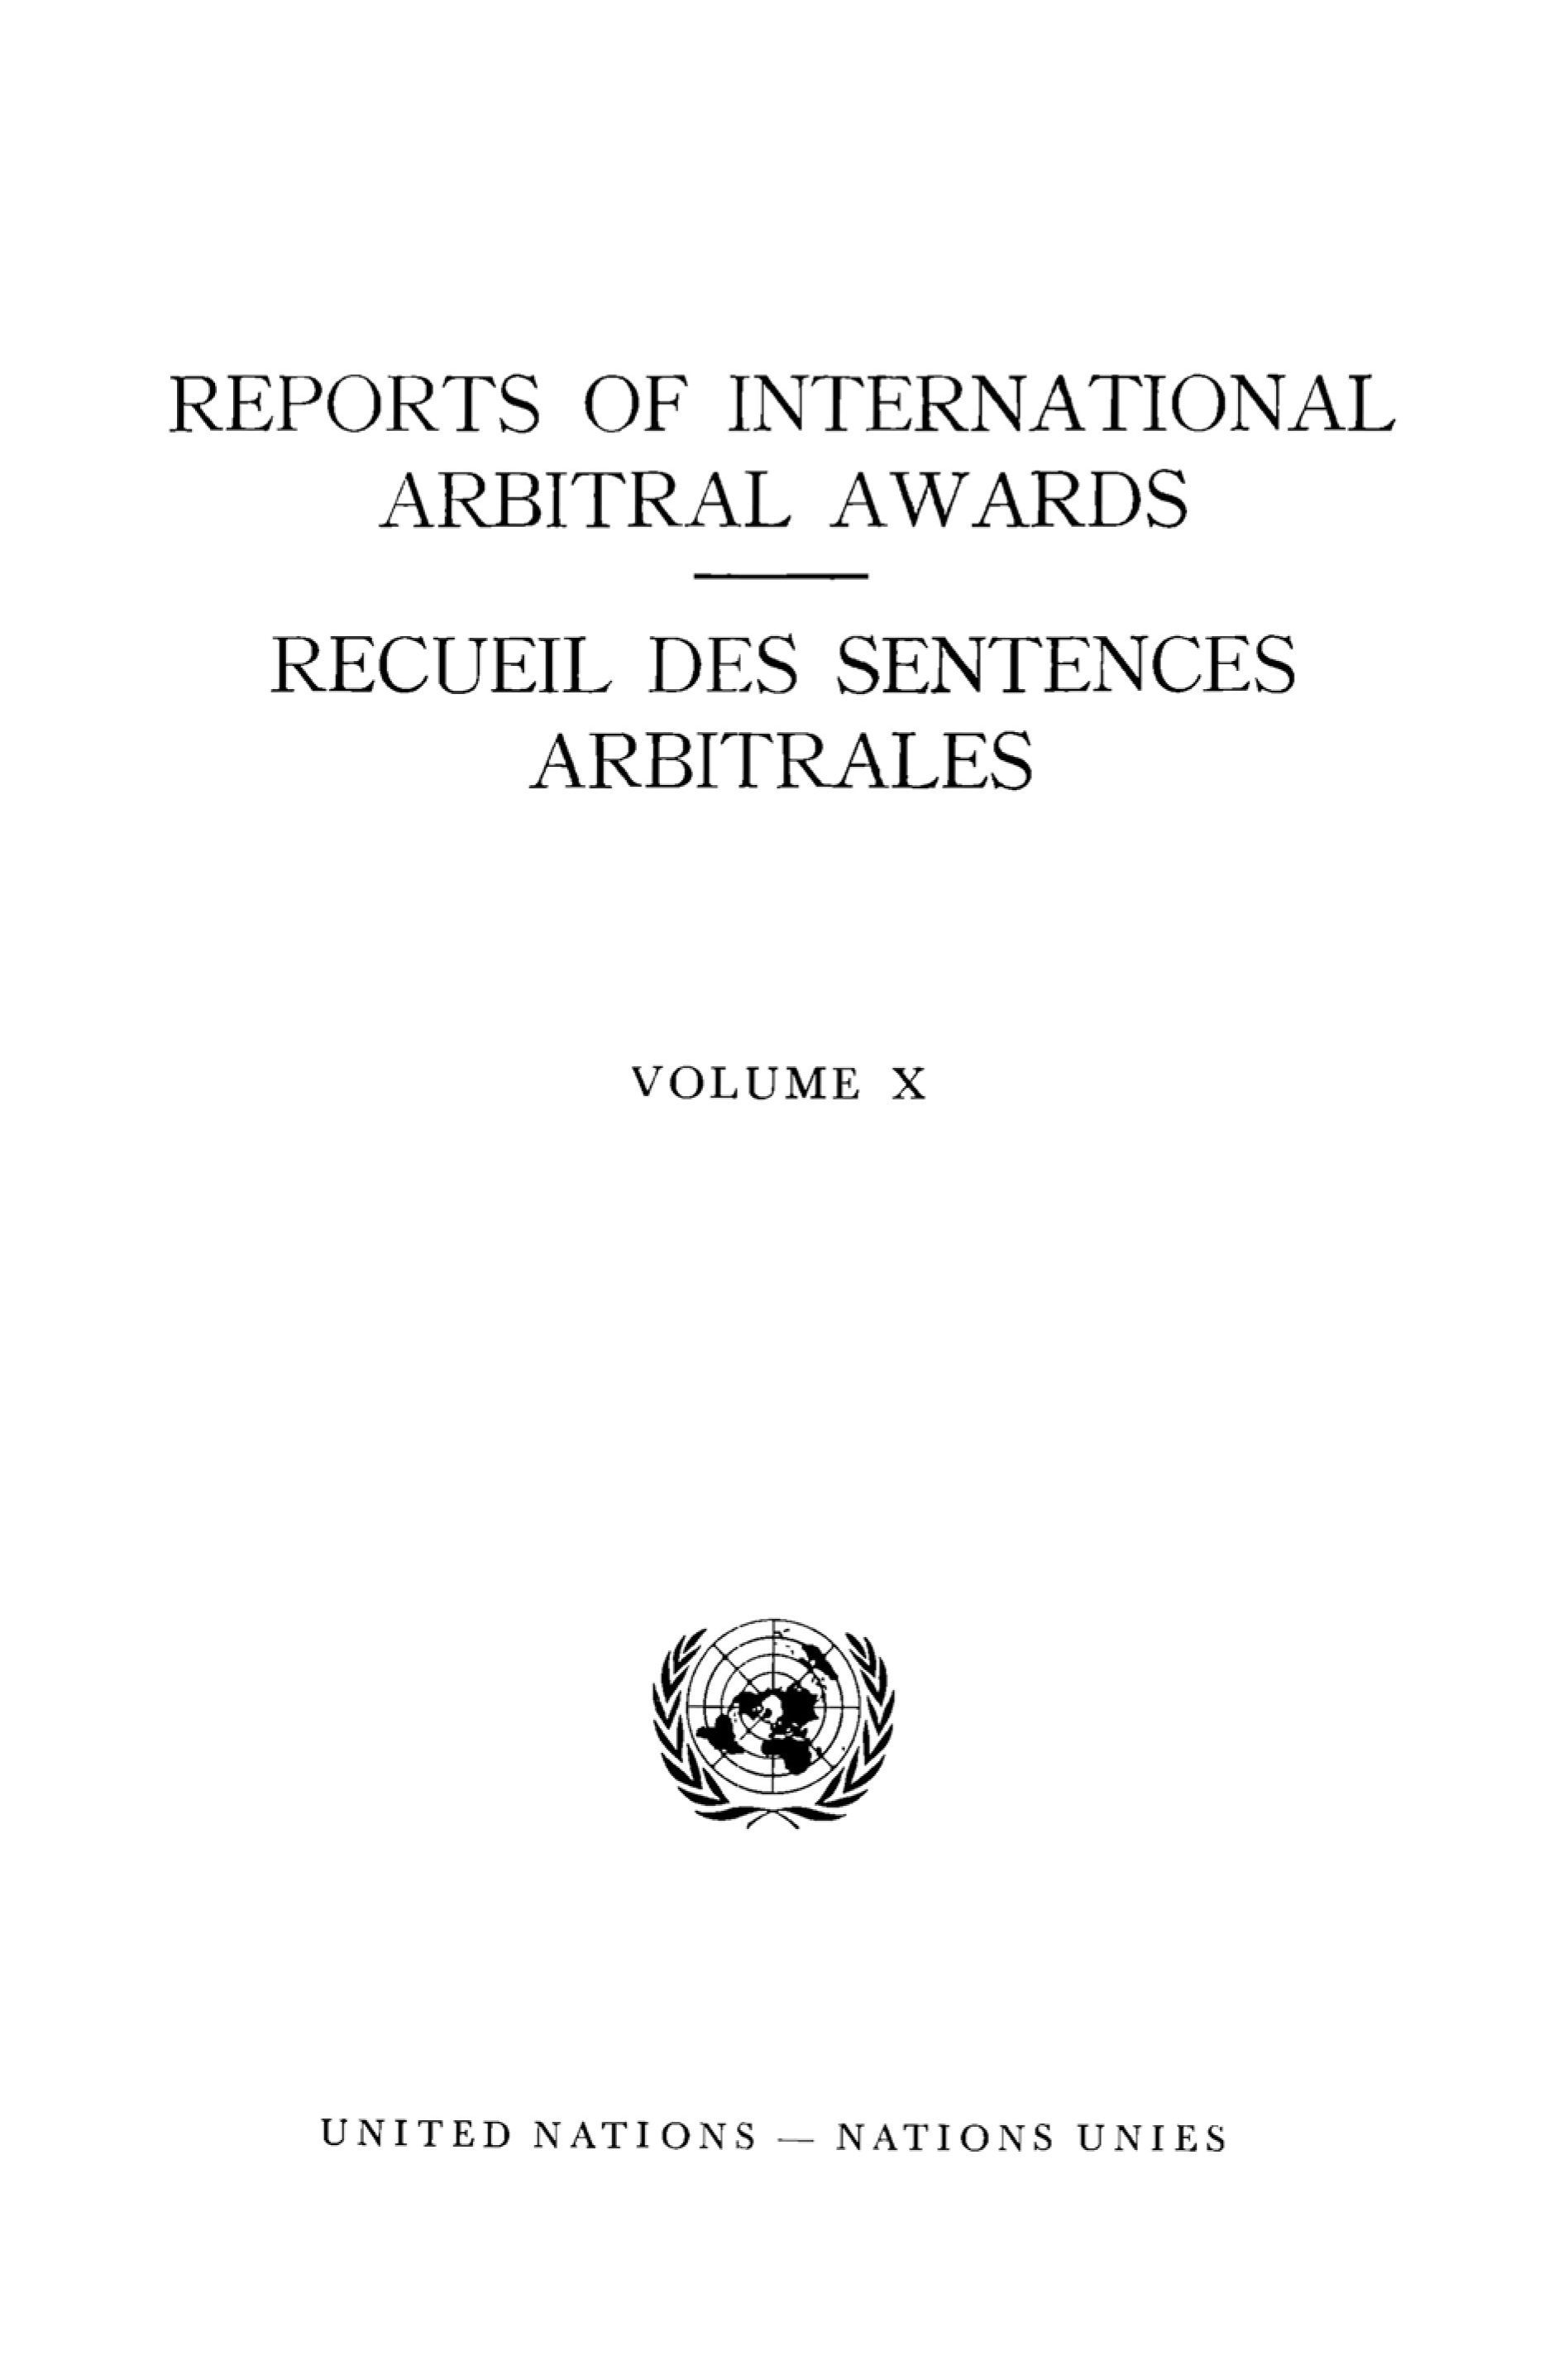 image of Reports of International Arbitral Awards, Vol. X